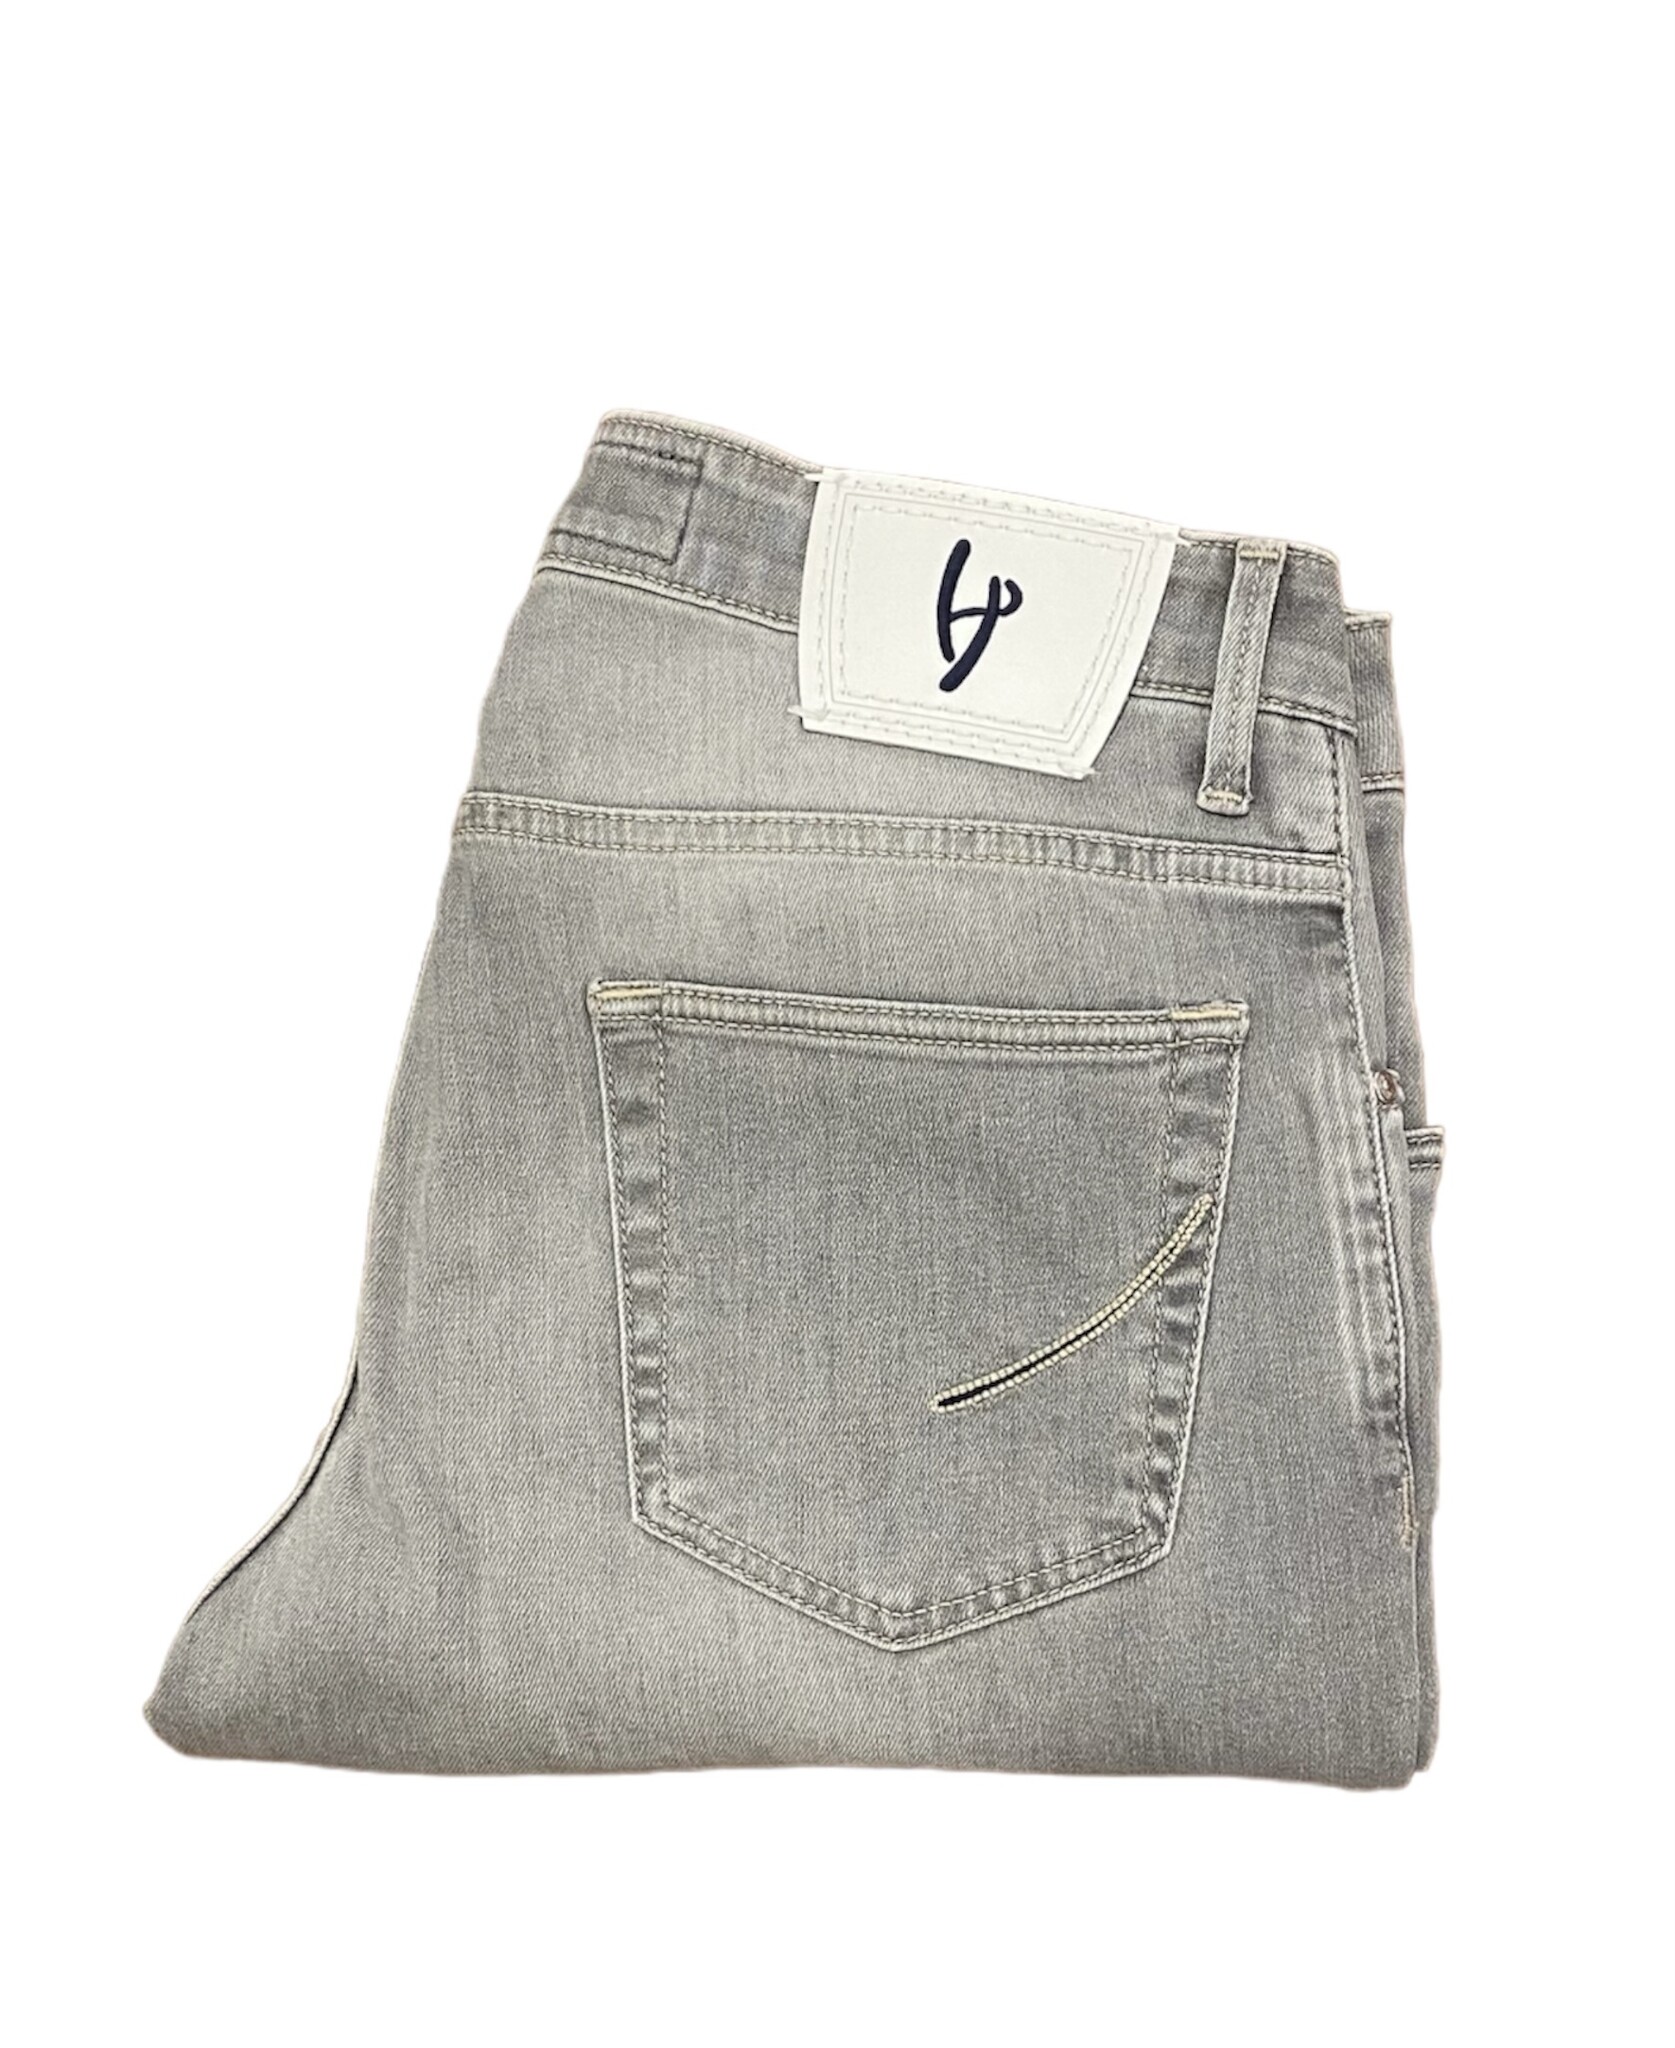 NEW IN! Handpicked jeans